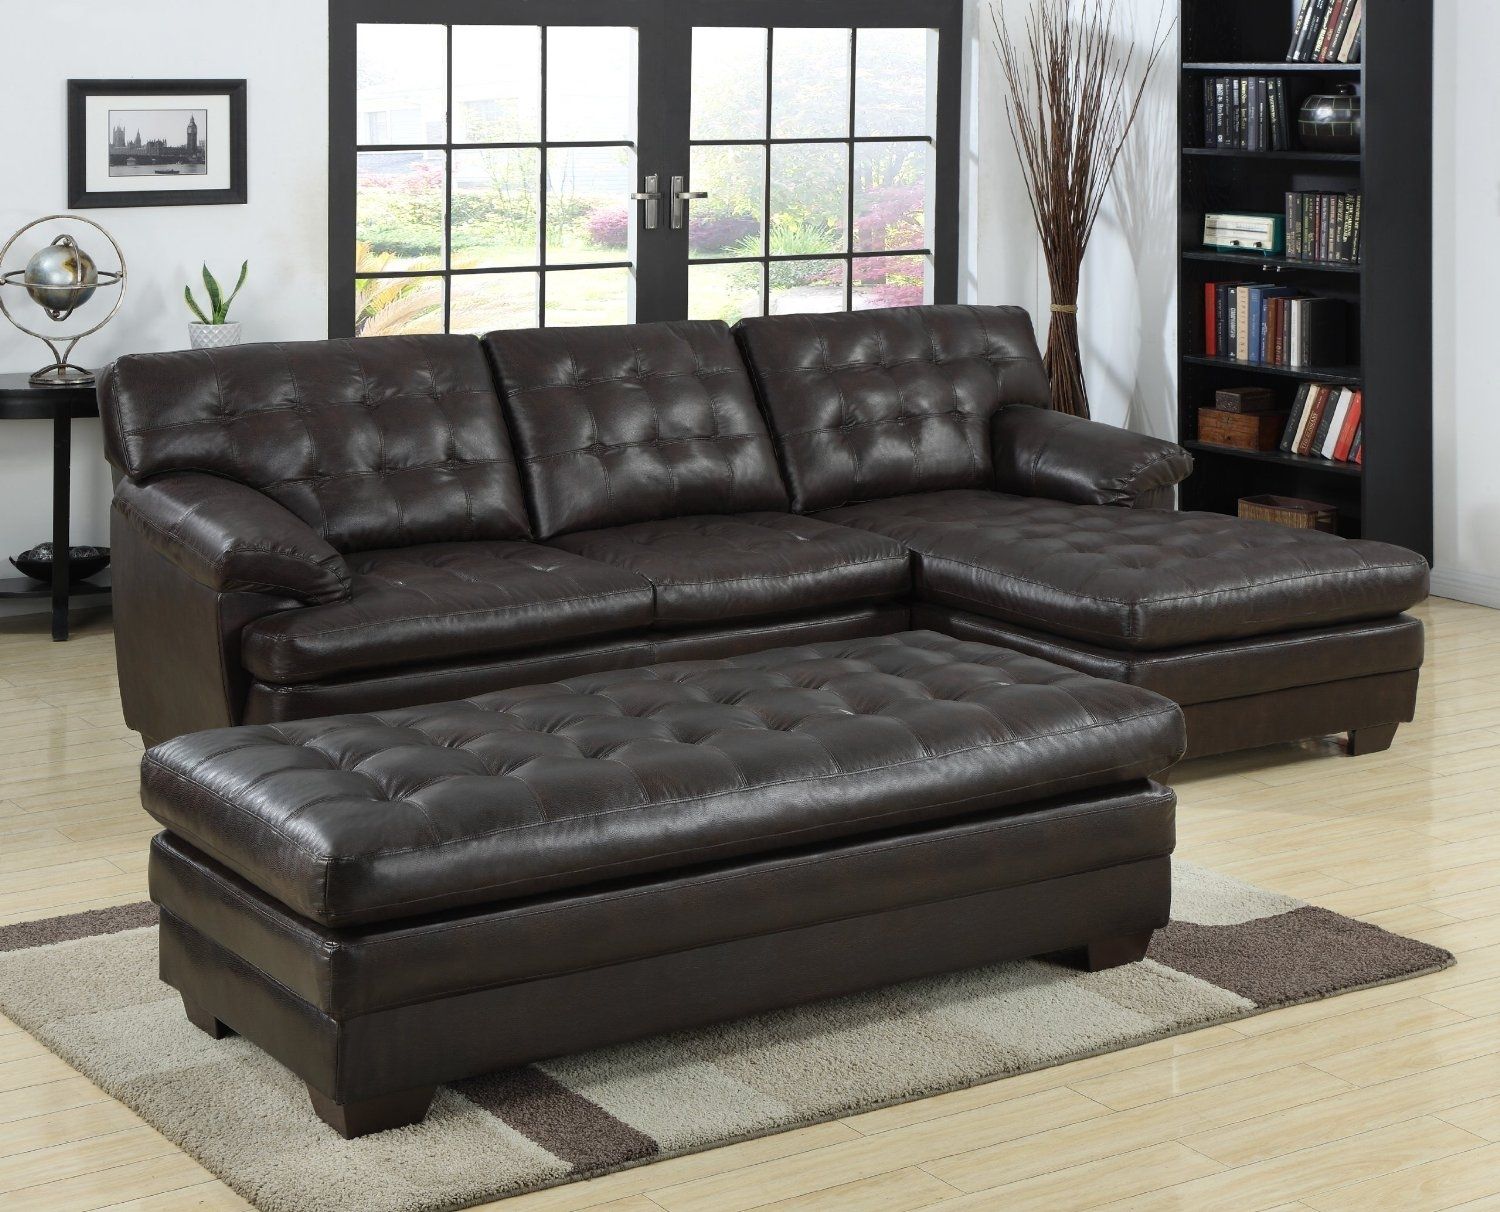 Black Tufted Leather Sectional Sofa With Chaise And Bench Seat Plus Pertaining To Leather Sectionals With Chaise And Ottoman (Photo 4 of 15)